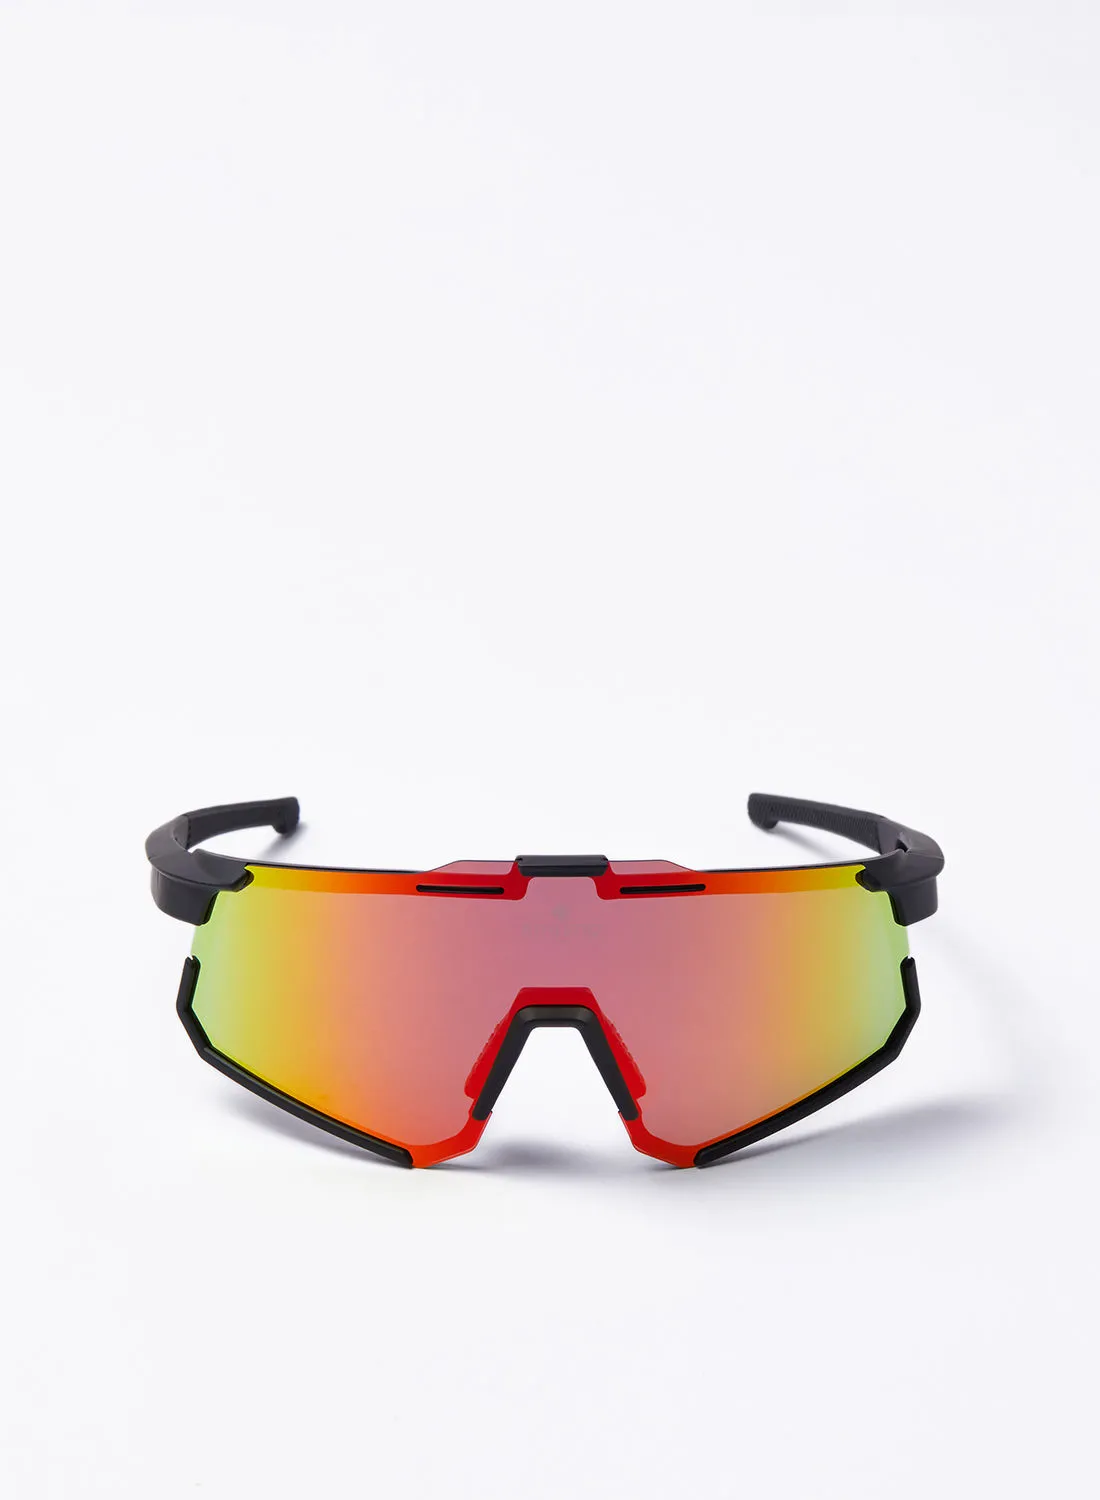 Athletiq Cycling Scooter Sunglasses - Athletiq Club Jabal Sawda - Black Frame With Red Fire Multilayer Mirror Lens